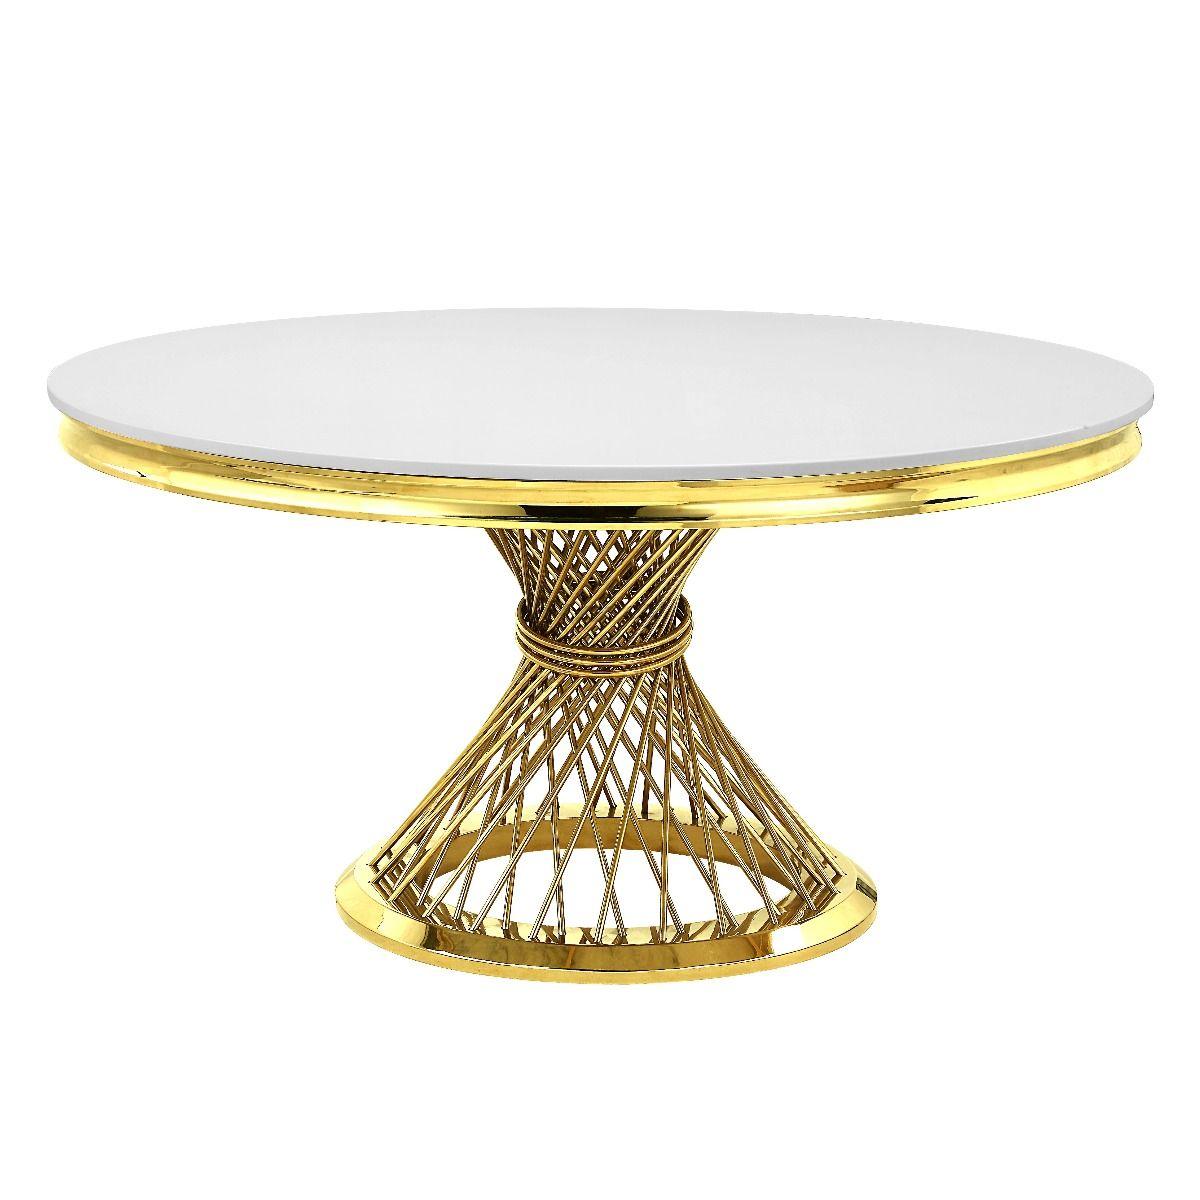 Modern, Classic Dining Table Fallon DN01189 DN01189 in Gold Finish, White 